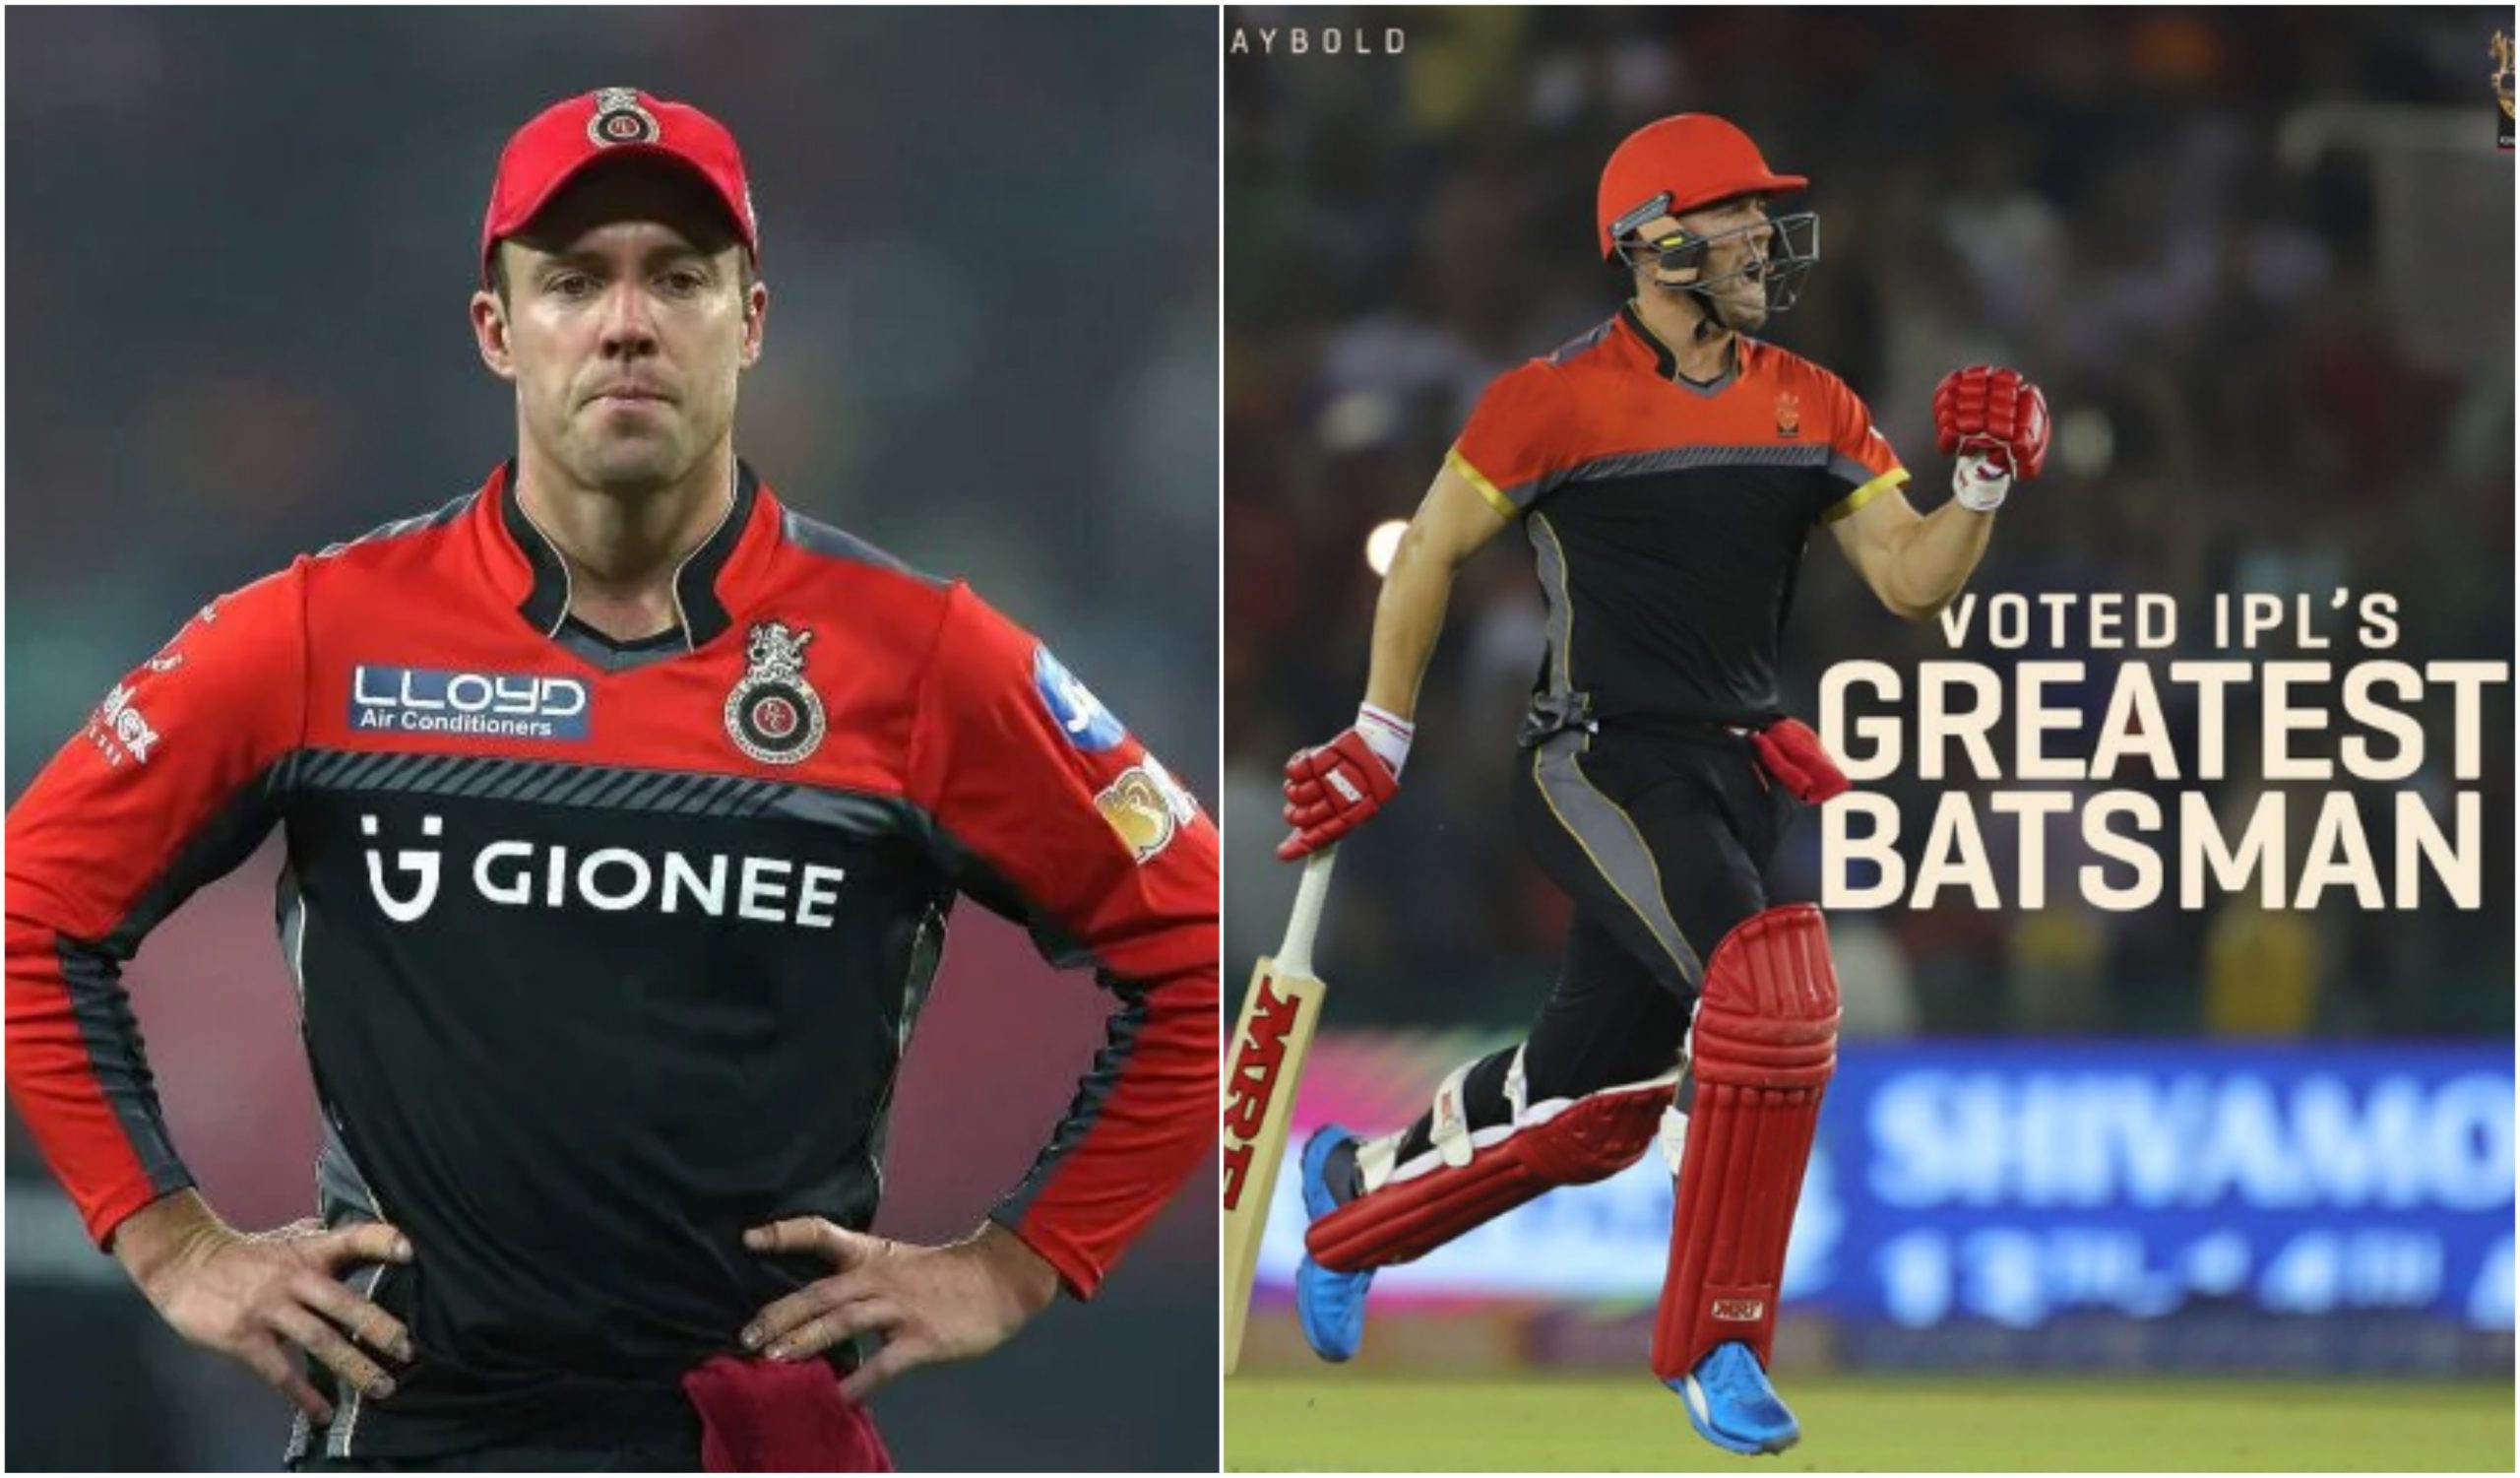 AB De Villiers has been selected as the greatest IPL batsman of all time